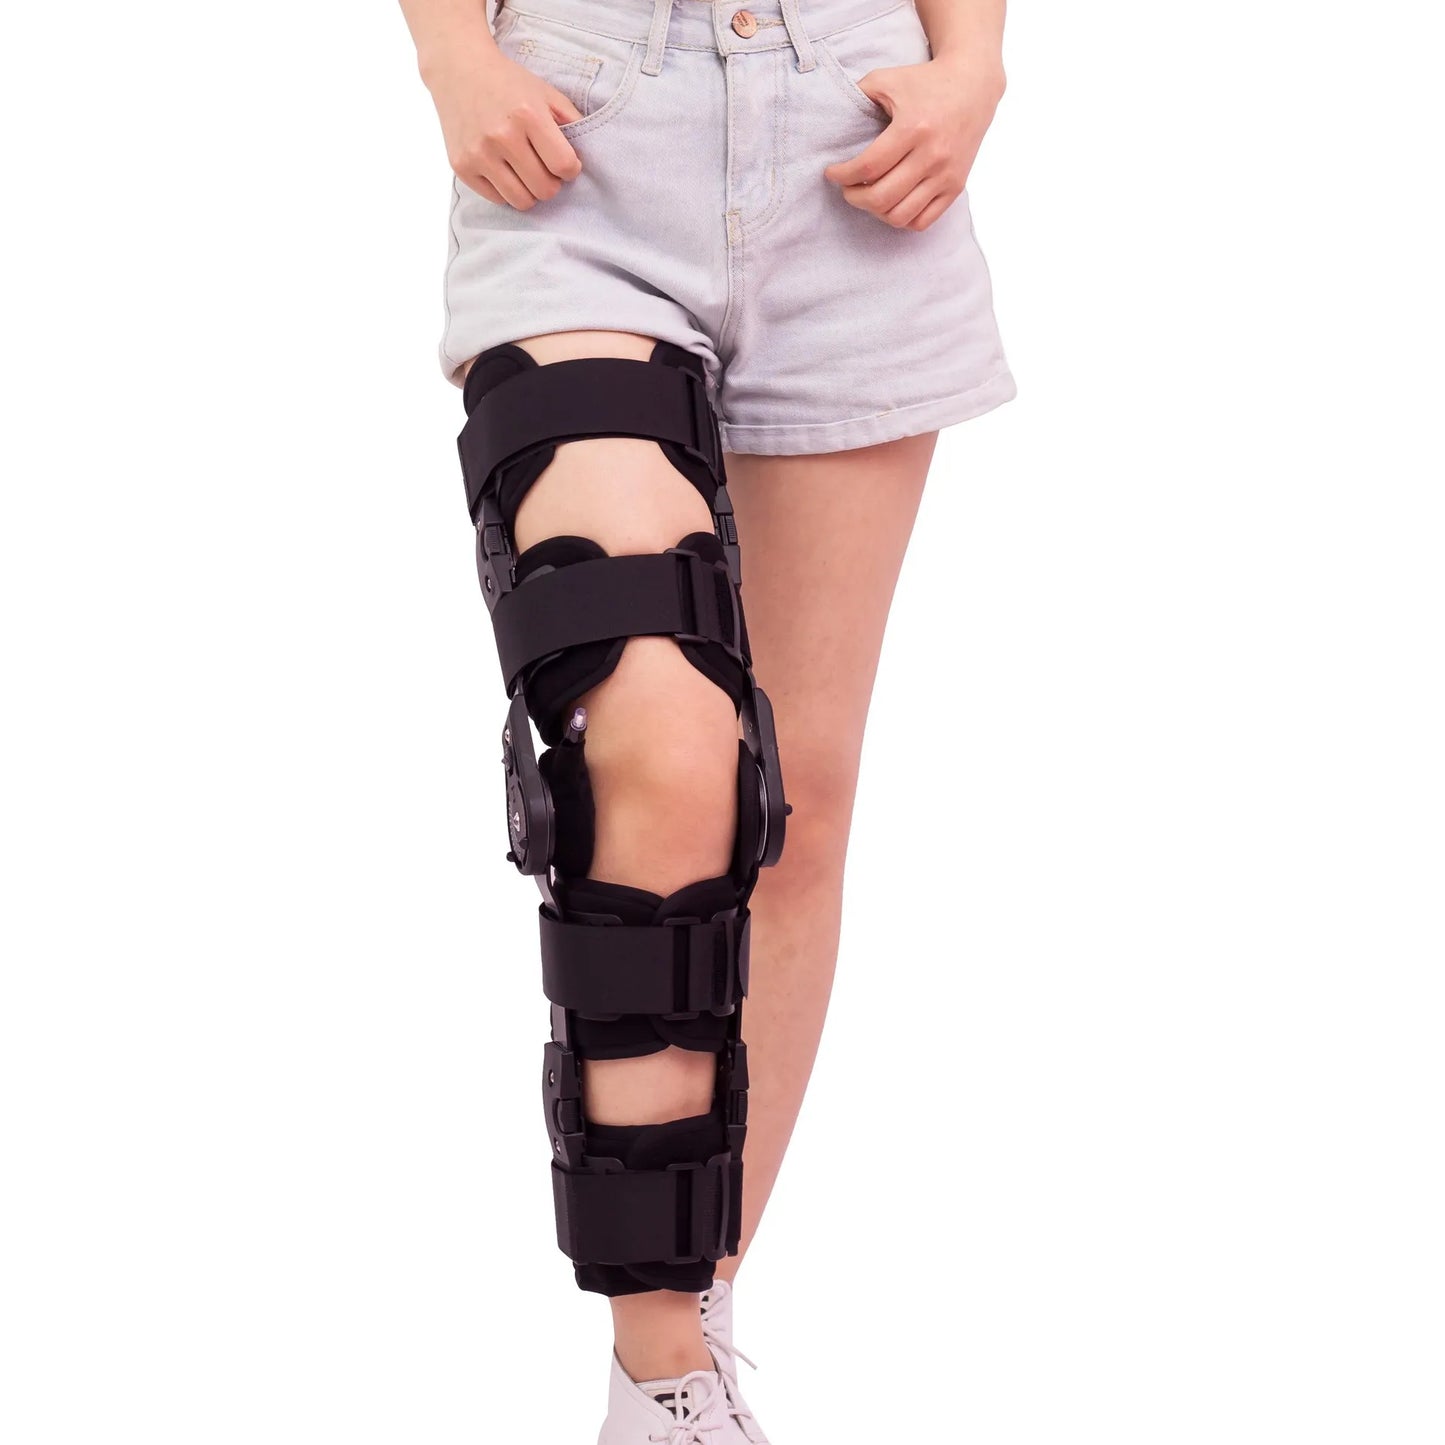 Adjustable Hinged ROM Knee Brace For Recovery ACL MCL & PCL Injury Medical Orthopedic Support Stabilizer After Surgery